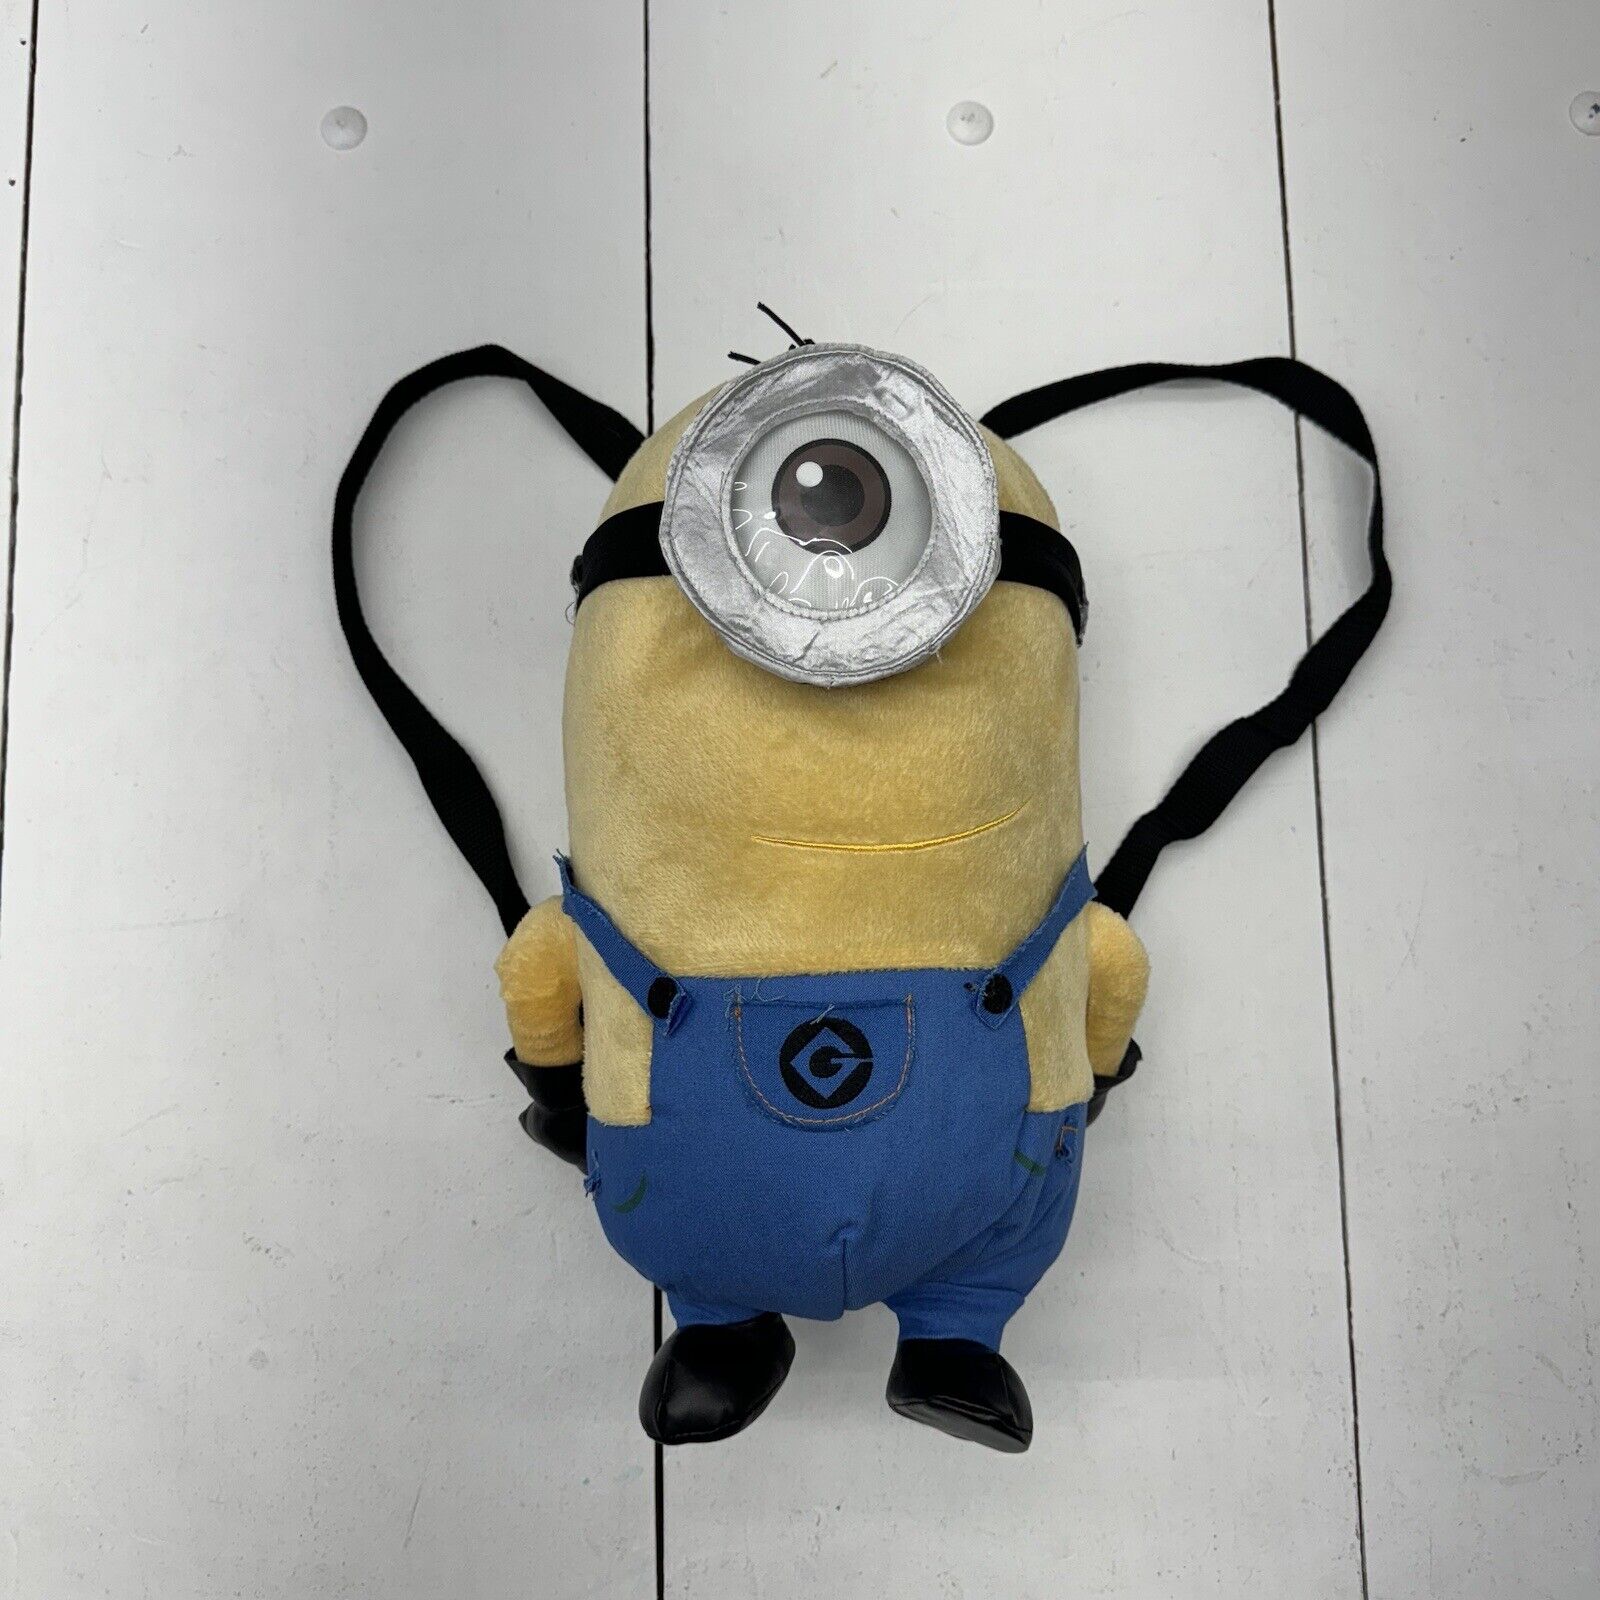 Despicable Me 2 Minions Plush Backpack 17” 1 Small Zip Pocket Adjustable Straps